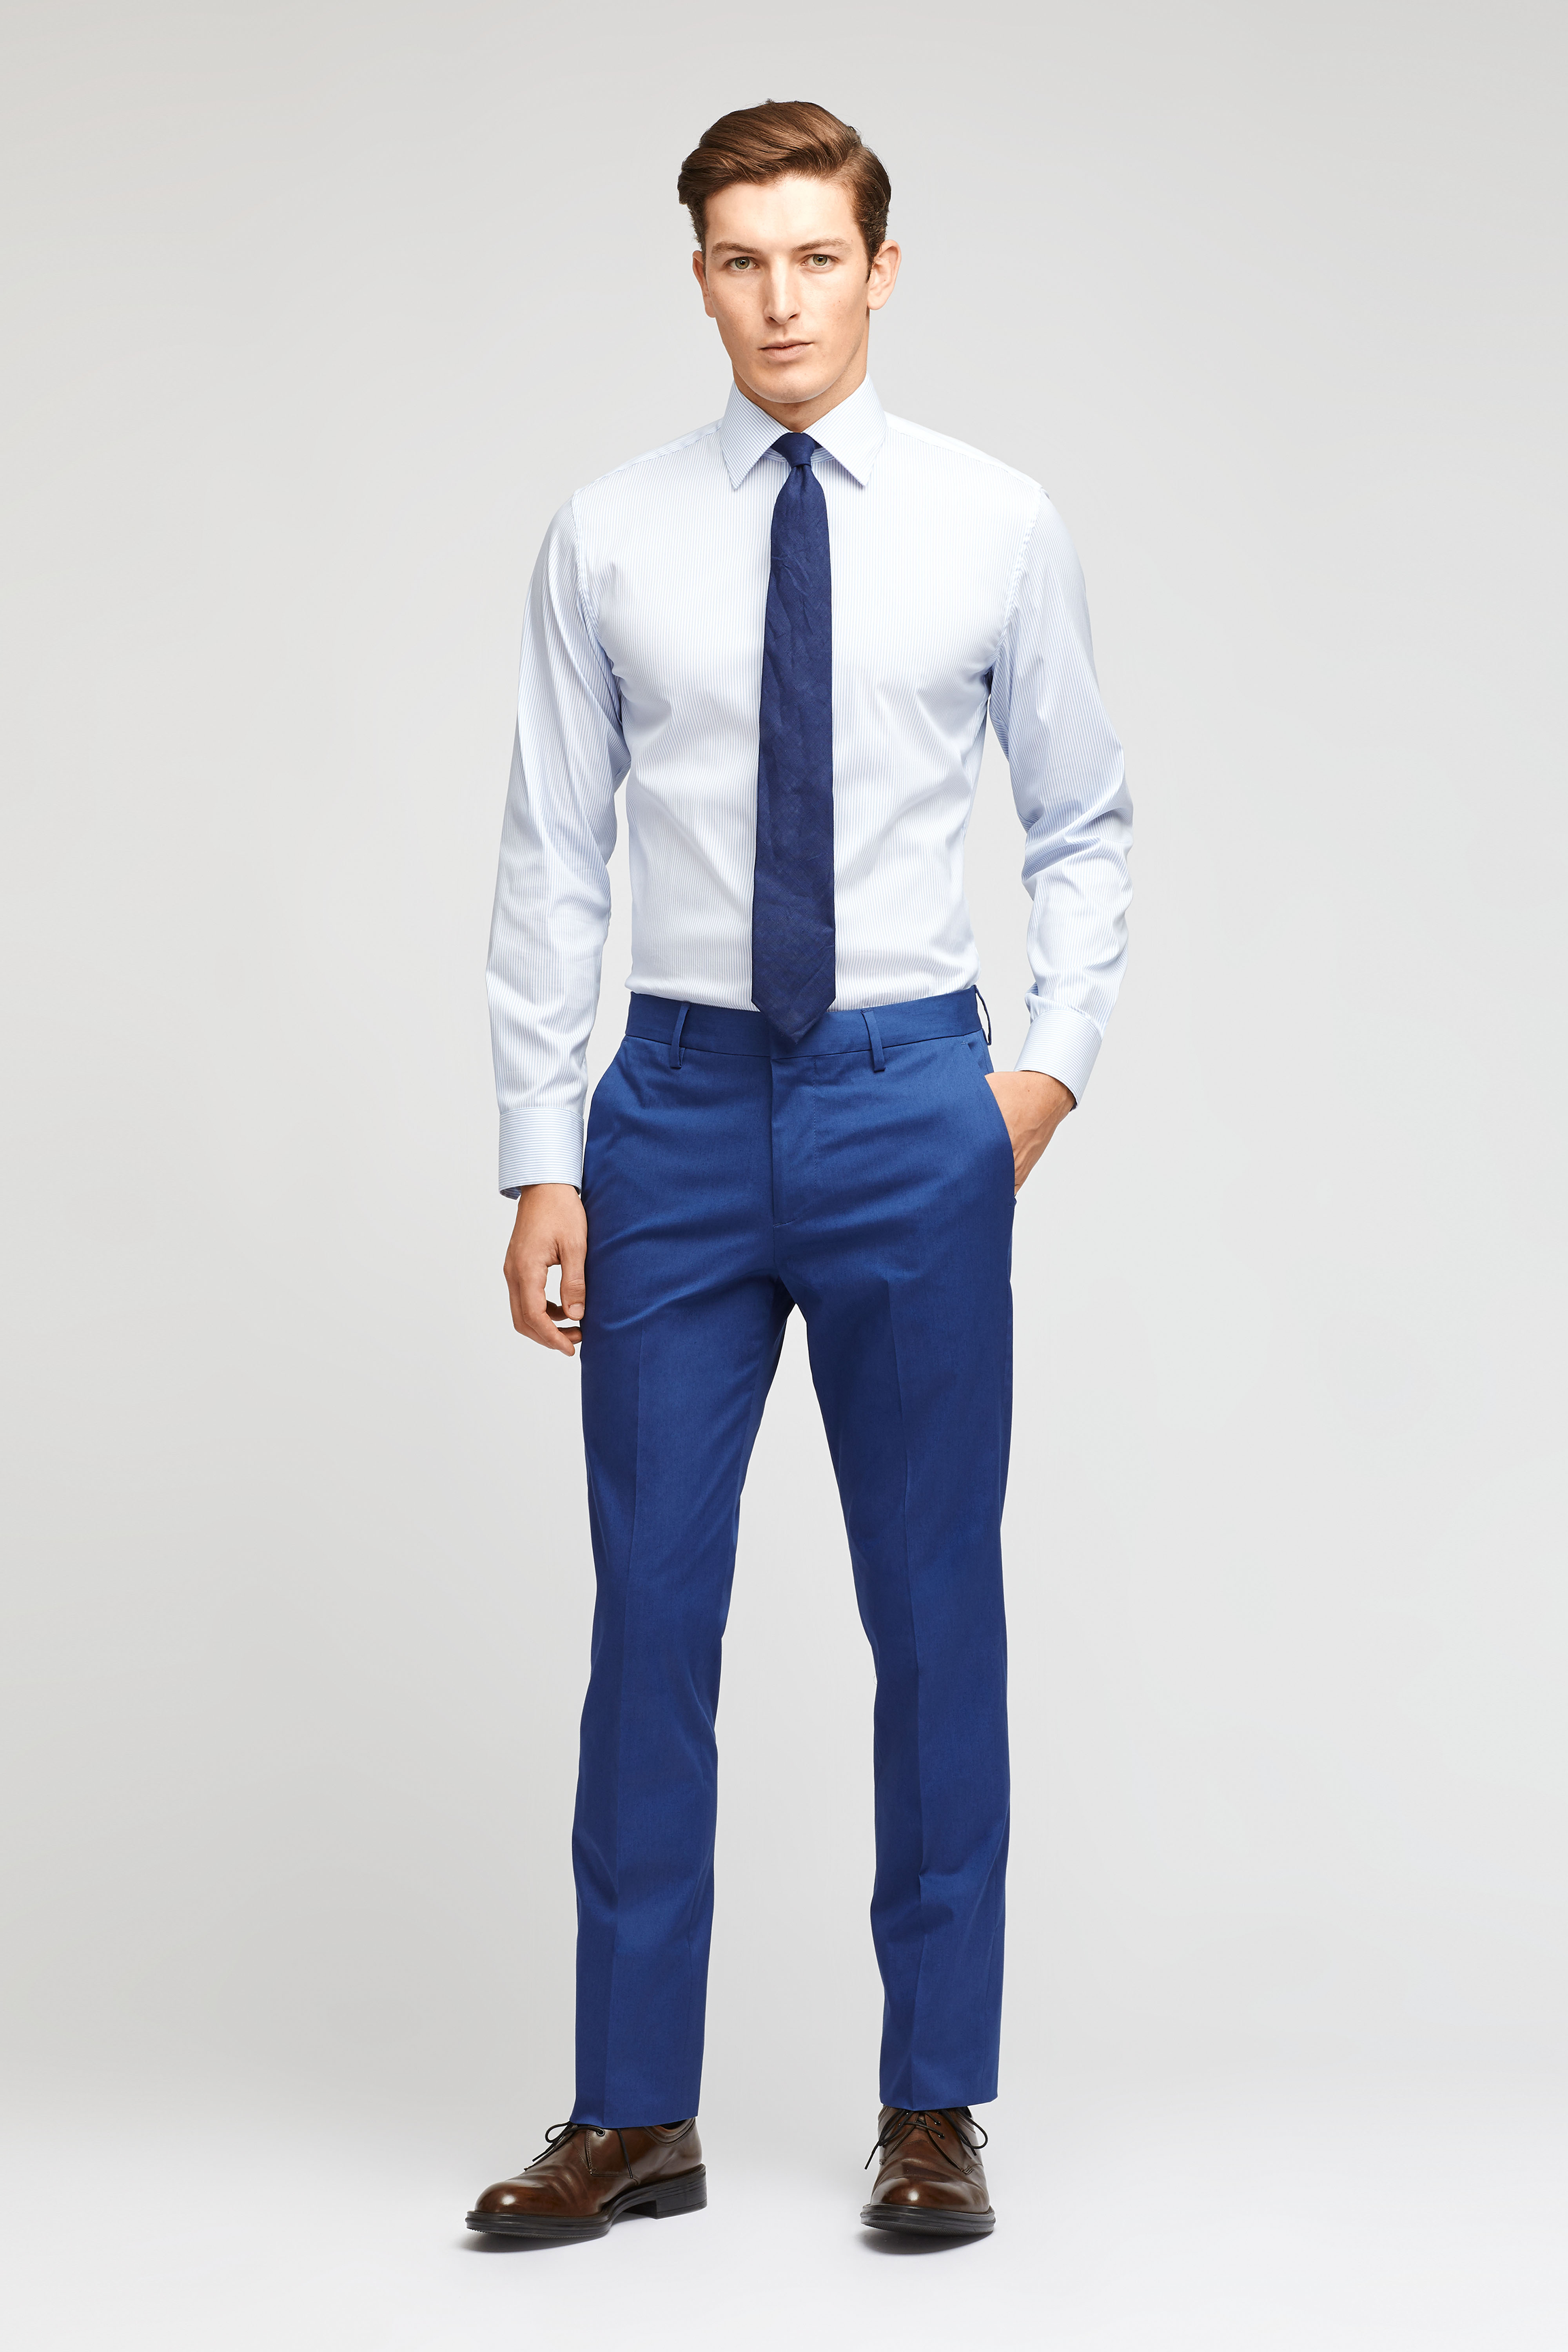 Blue donegal tweed flat-front Dress Pants